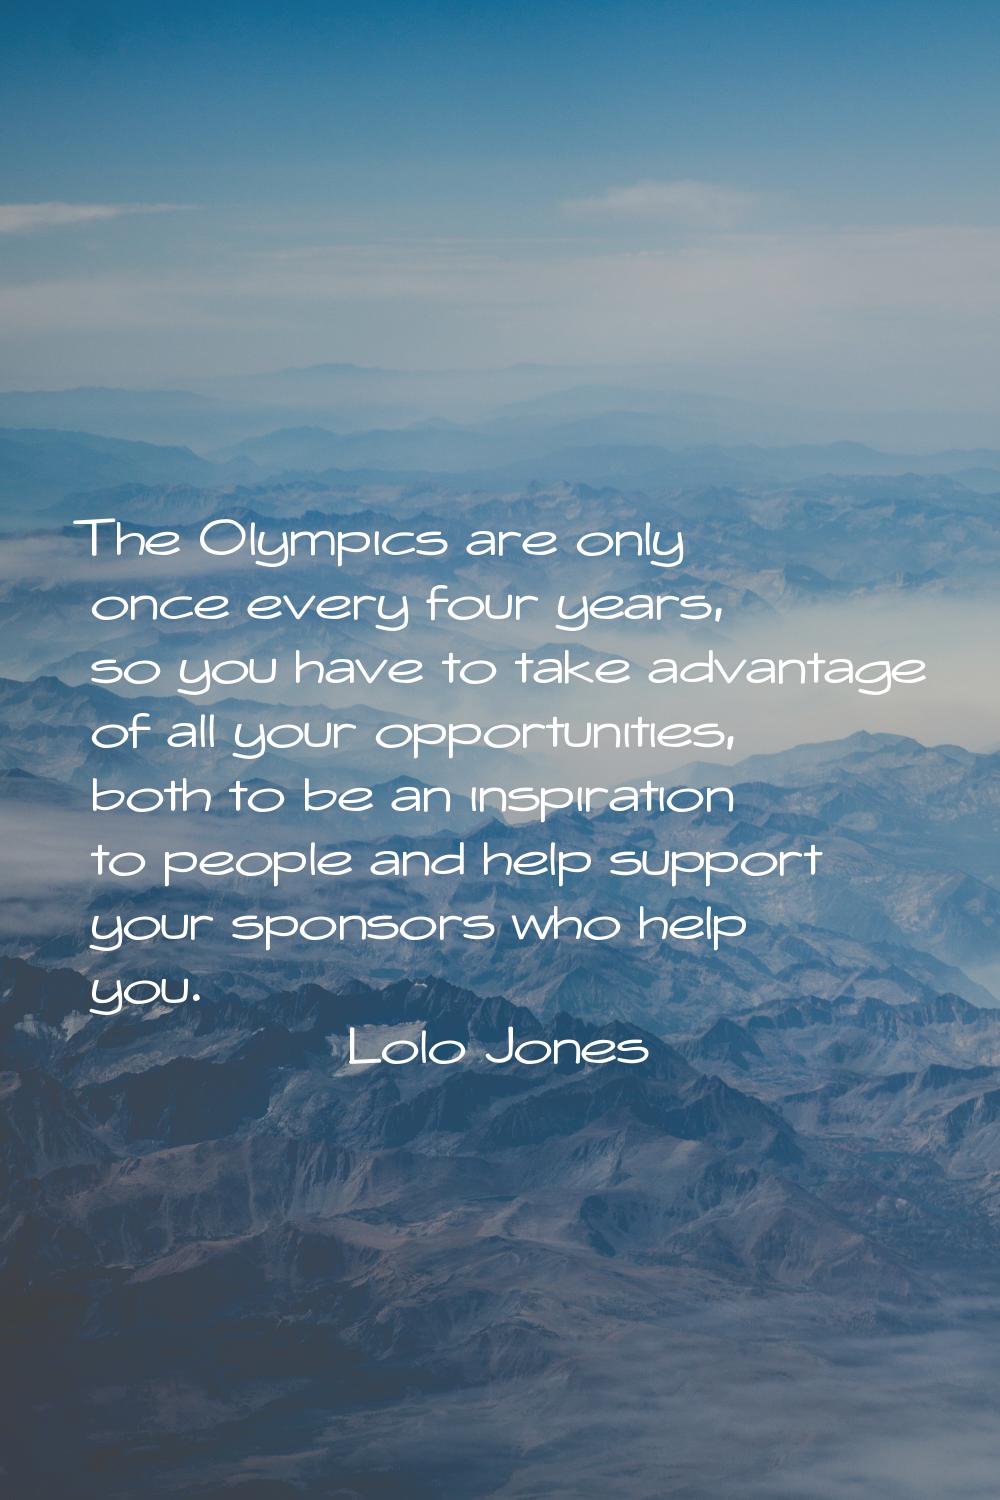 The Olympics are only once every four years, so you have to take advantage of all your opportunitie